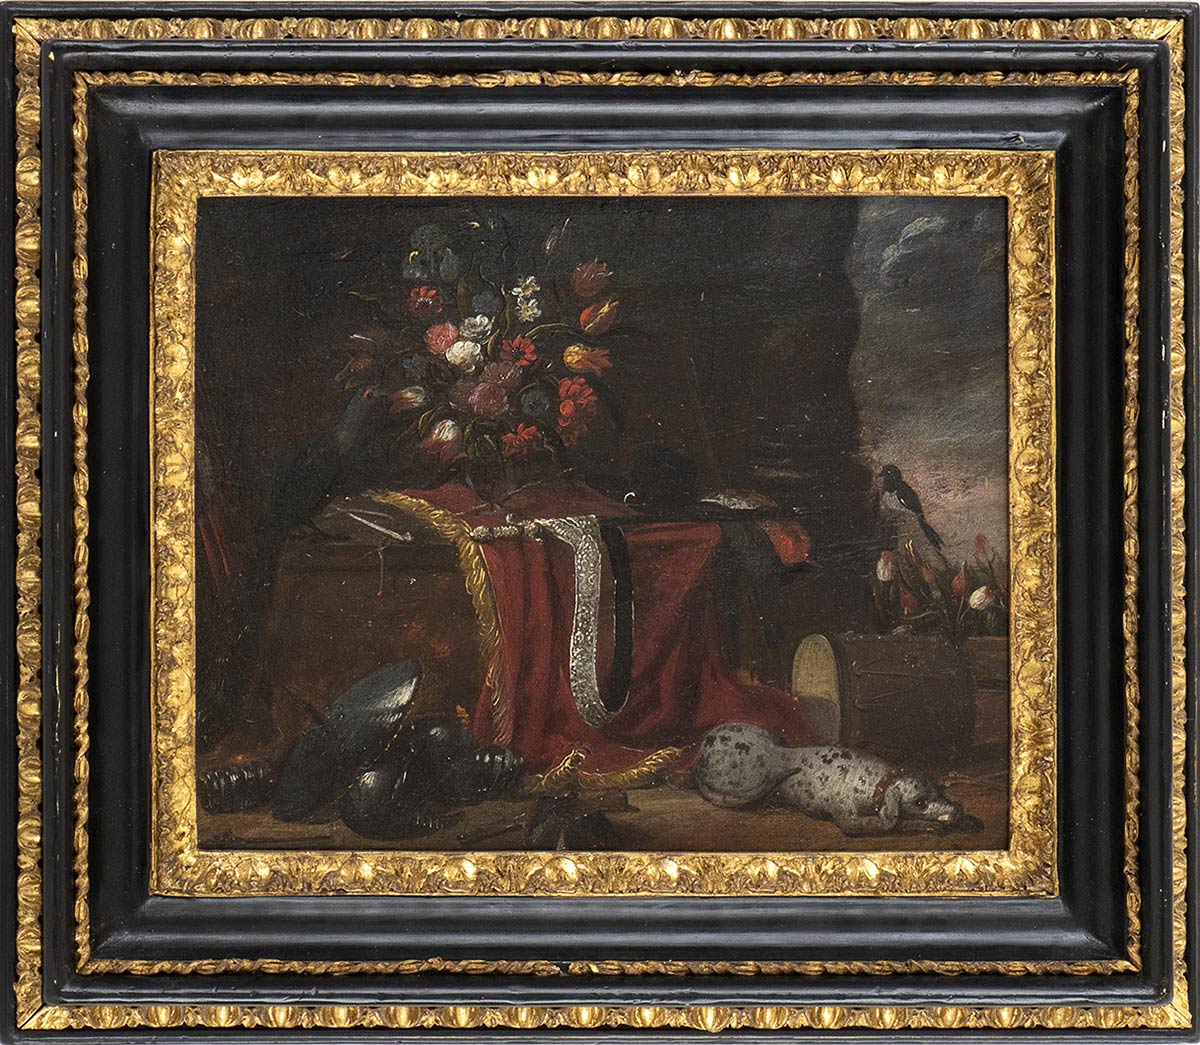 FLEMISH SCHOOL, 17th CENTURY - Still life with vase of flowers, military tools and a dog